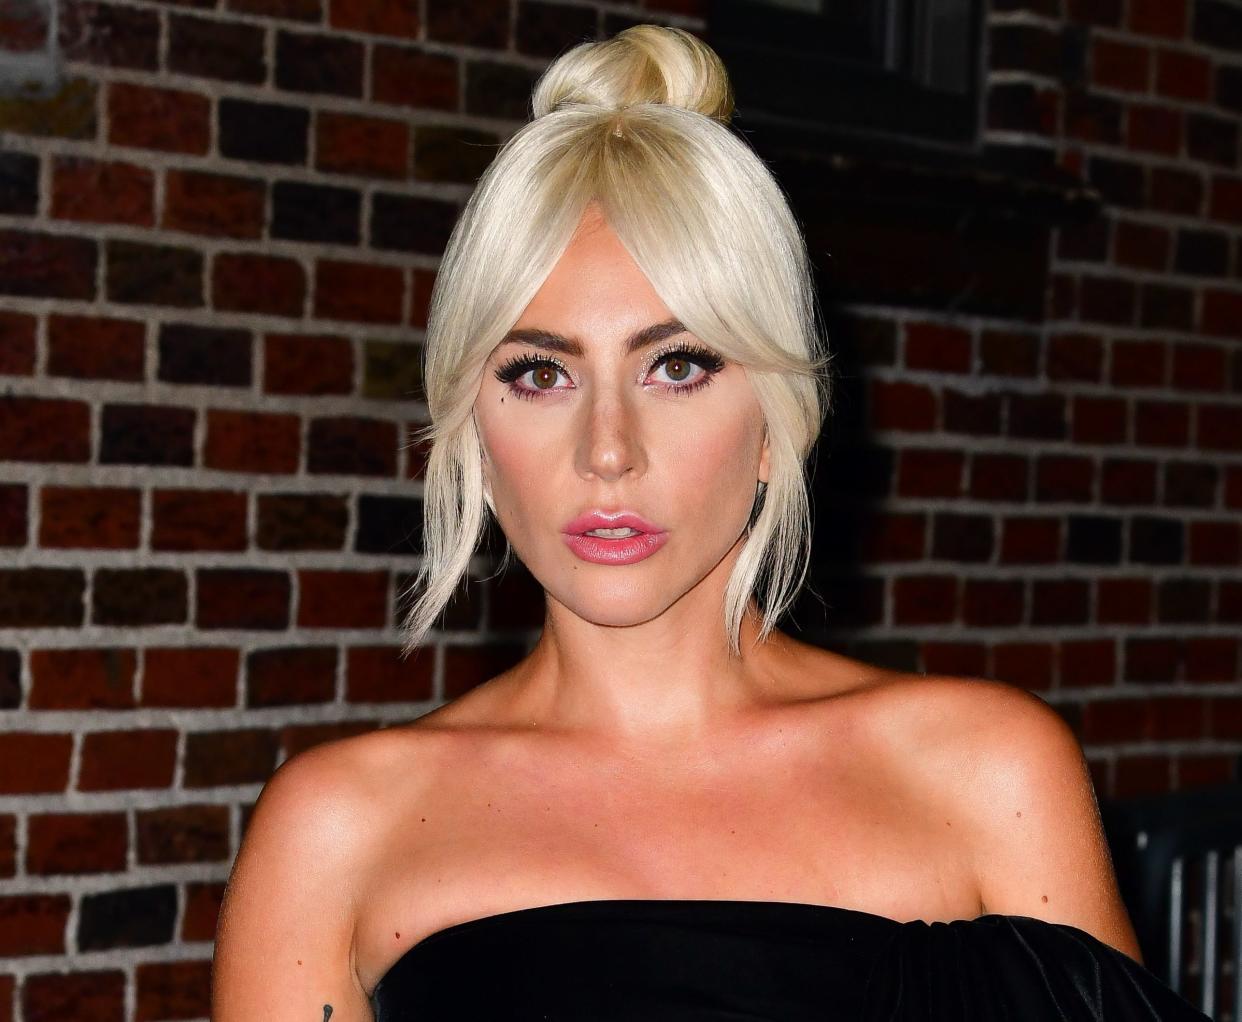 Lady Gaga leaves "The Late Show With Stephen Colbert" on Thursday.&nbsp; (Photo: James Devaney via Getty Images)